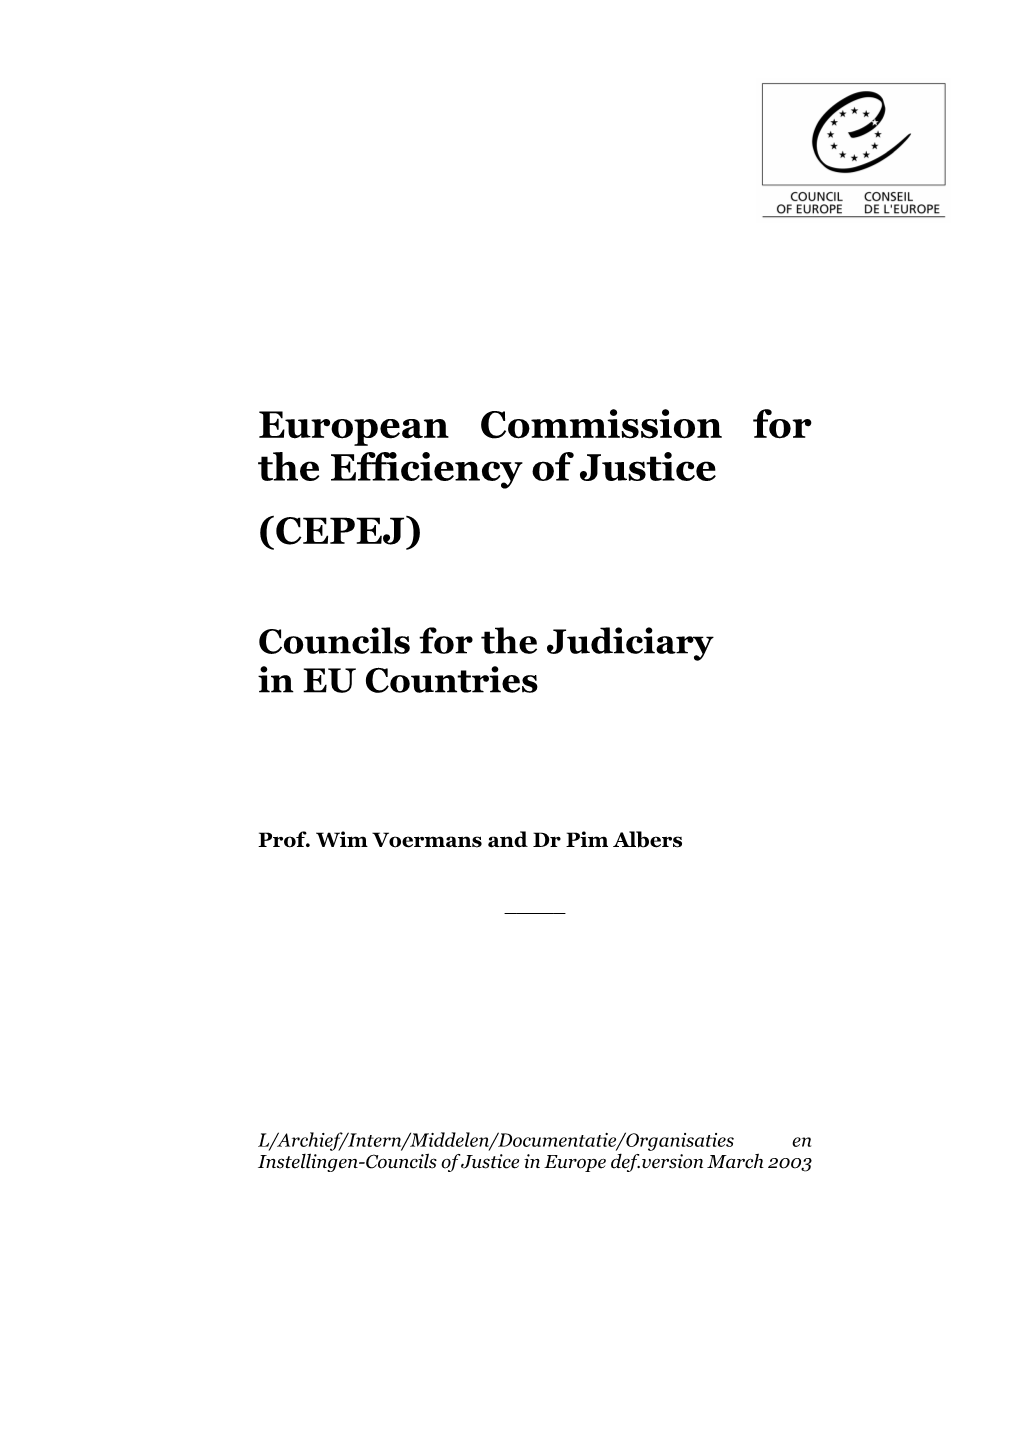 European Commission for the Efficiency of Justice (CEPEJ)